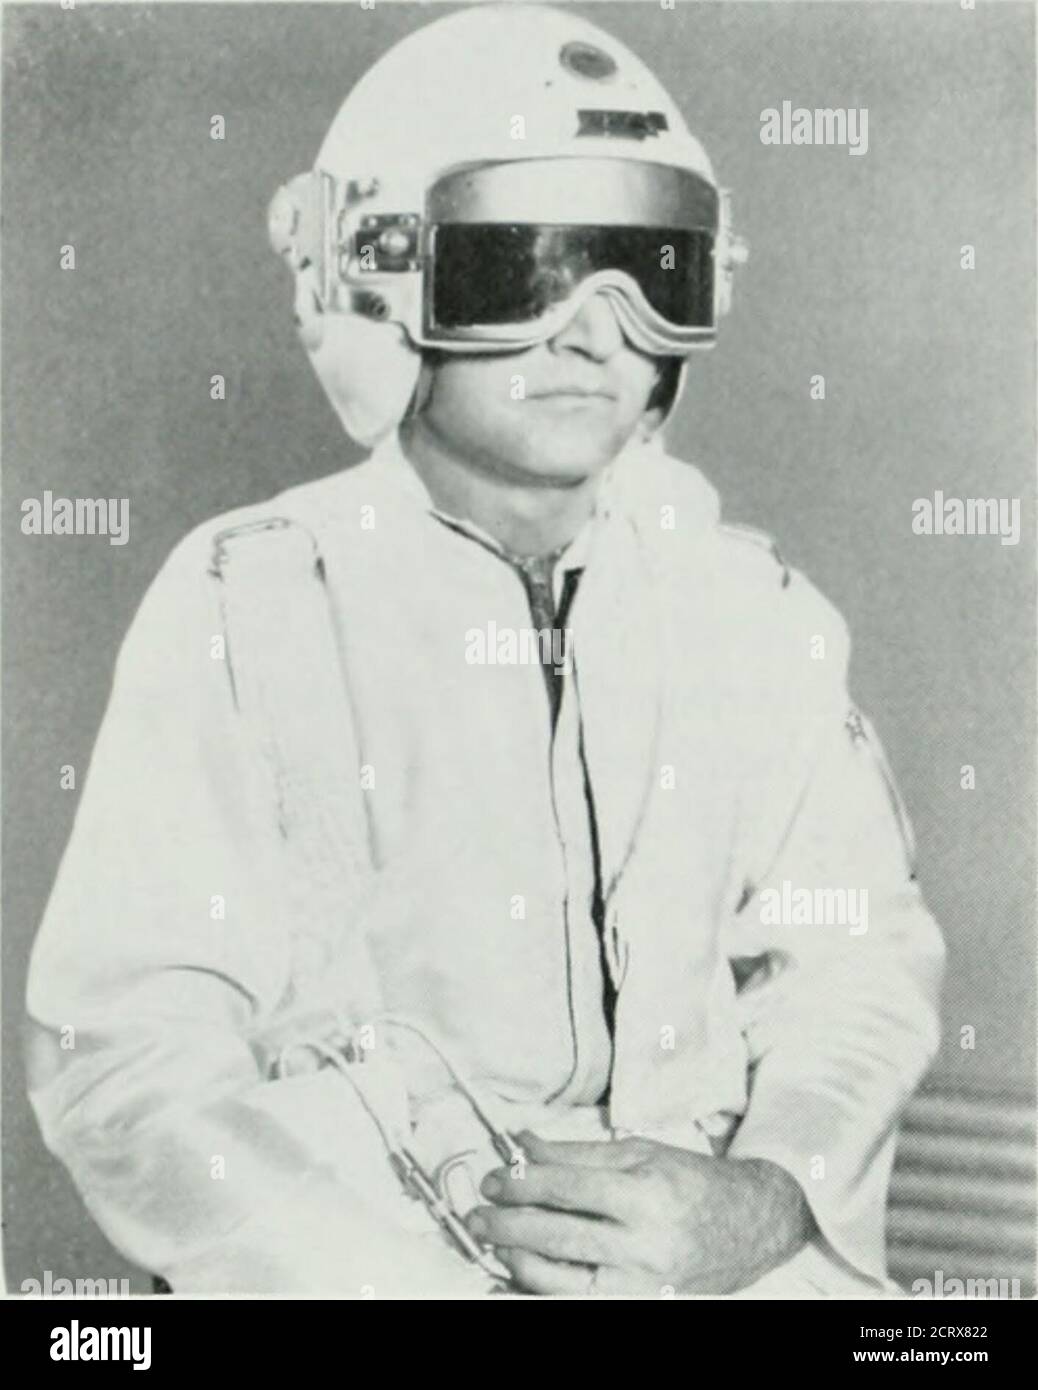 https://c8.alamy.com/comp/2CRX822/bell-telephone-magazine-a-nuclear-explosion-andprotect-the-vision-of-us-airmen-againstflash-blindness-the-goggles-employ-a-colloidal-mixture-ofgraphite-suspended-in-a-fluid-which-is-storedin-a-reservoir-above-the-double-lenses-whenan-intense-flash-occurs-which-threatensserious-eye-damage-it-is-detected-by-a-photosensor-in-the-airmans-helmet-the-sensortriggers-a-pencil-sized-explosive-which-pro-pels-the-opaque-mixture-into-a-narrow-gapbetween-the-front-and-rear-lens-plates-of-thegoggles-the-graphite-covers-the-lens-in-thefew-microseconds-before-the-light-has-timeto-damage-a-pilots-2CRX822.jpg